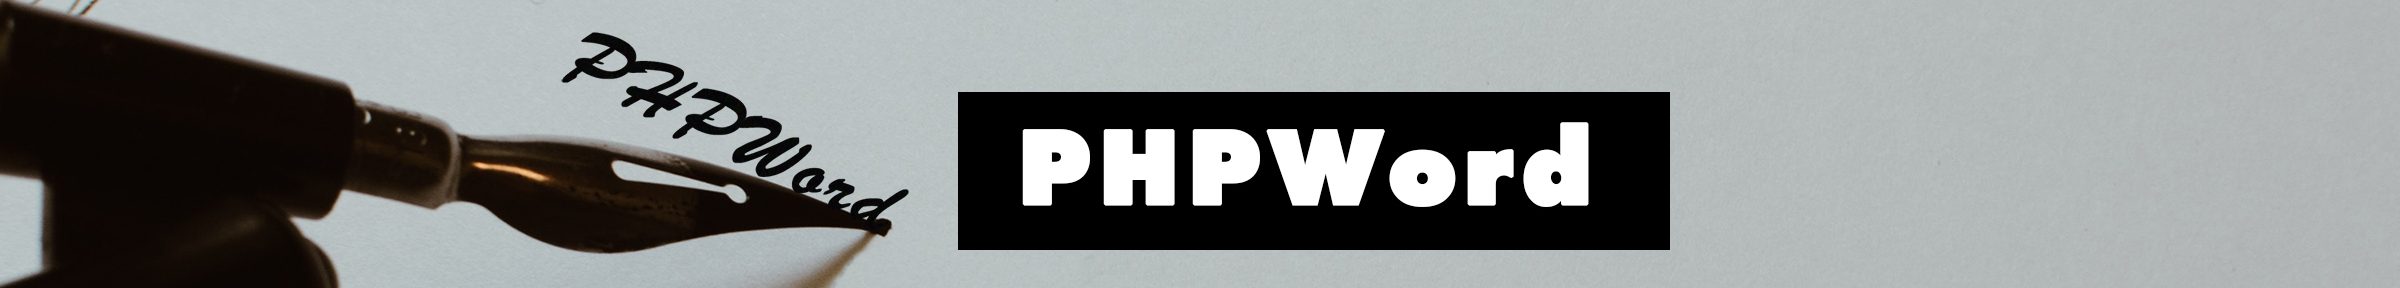 PHPWord: 3 Was to create Word documents with PHPWord